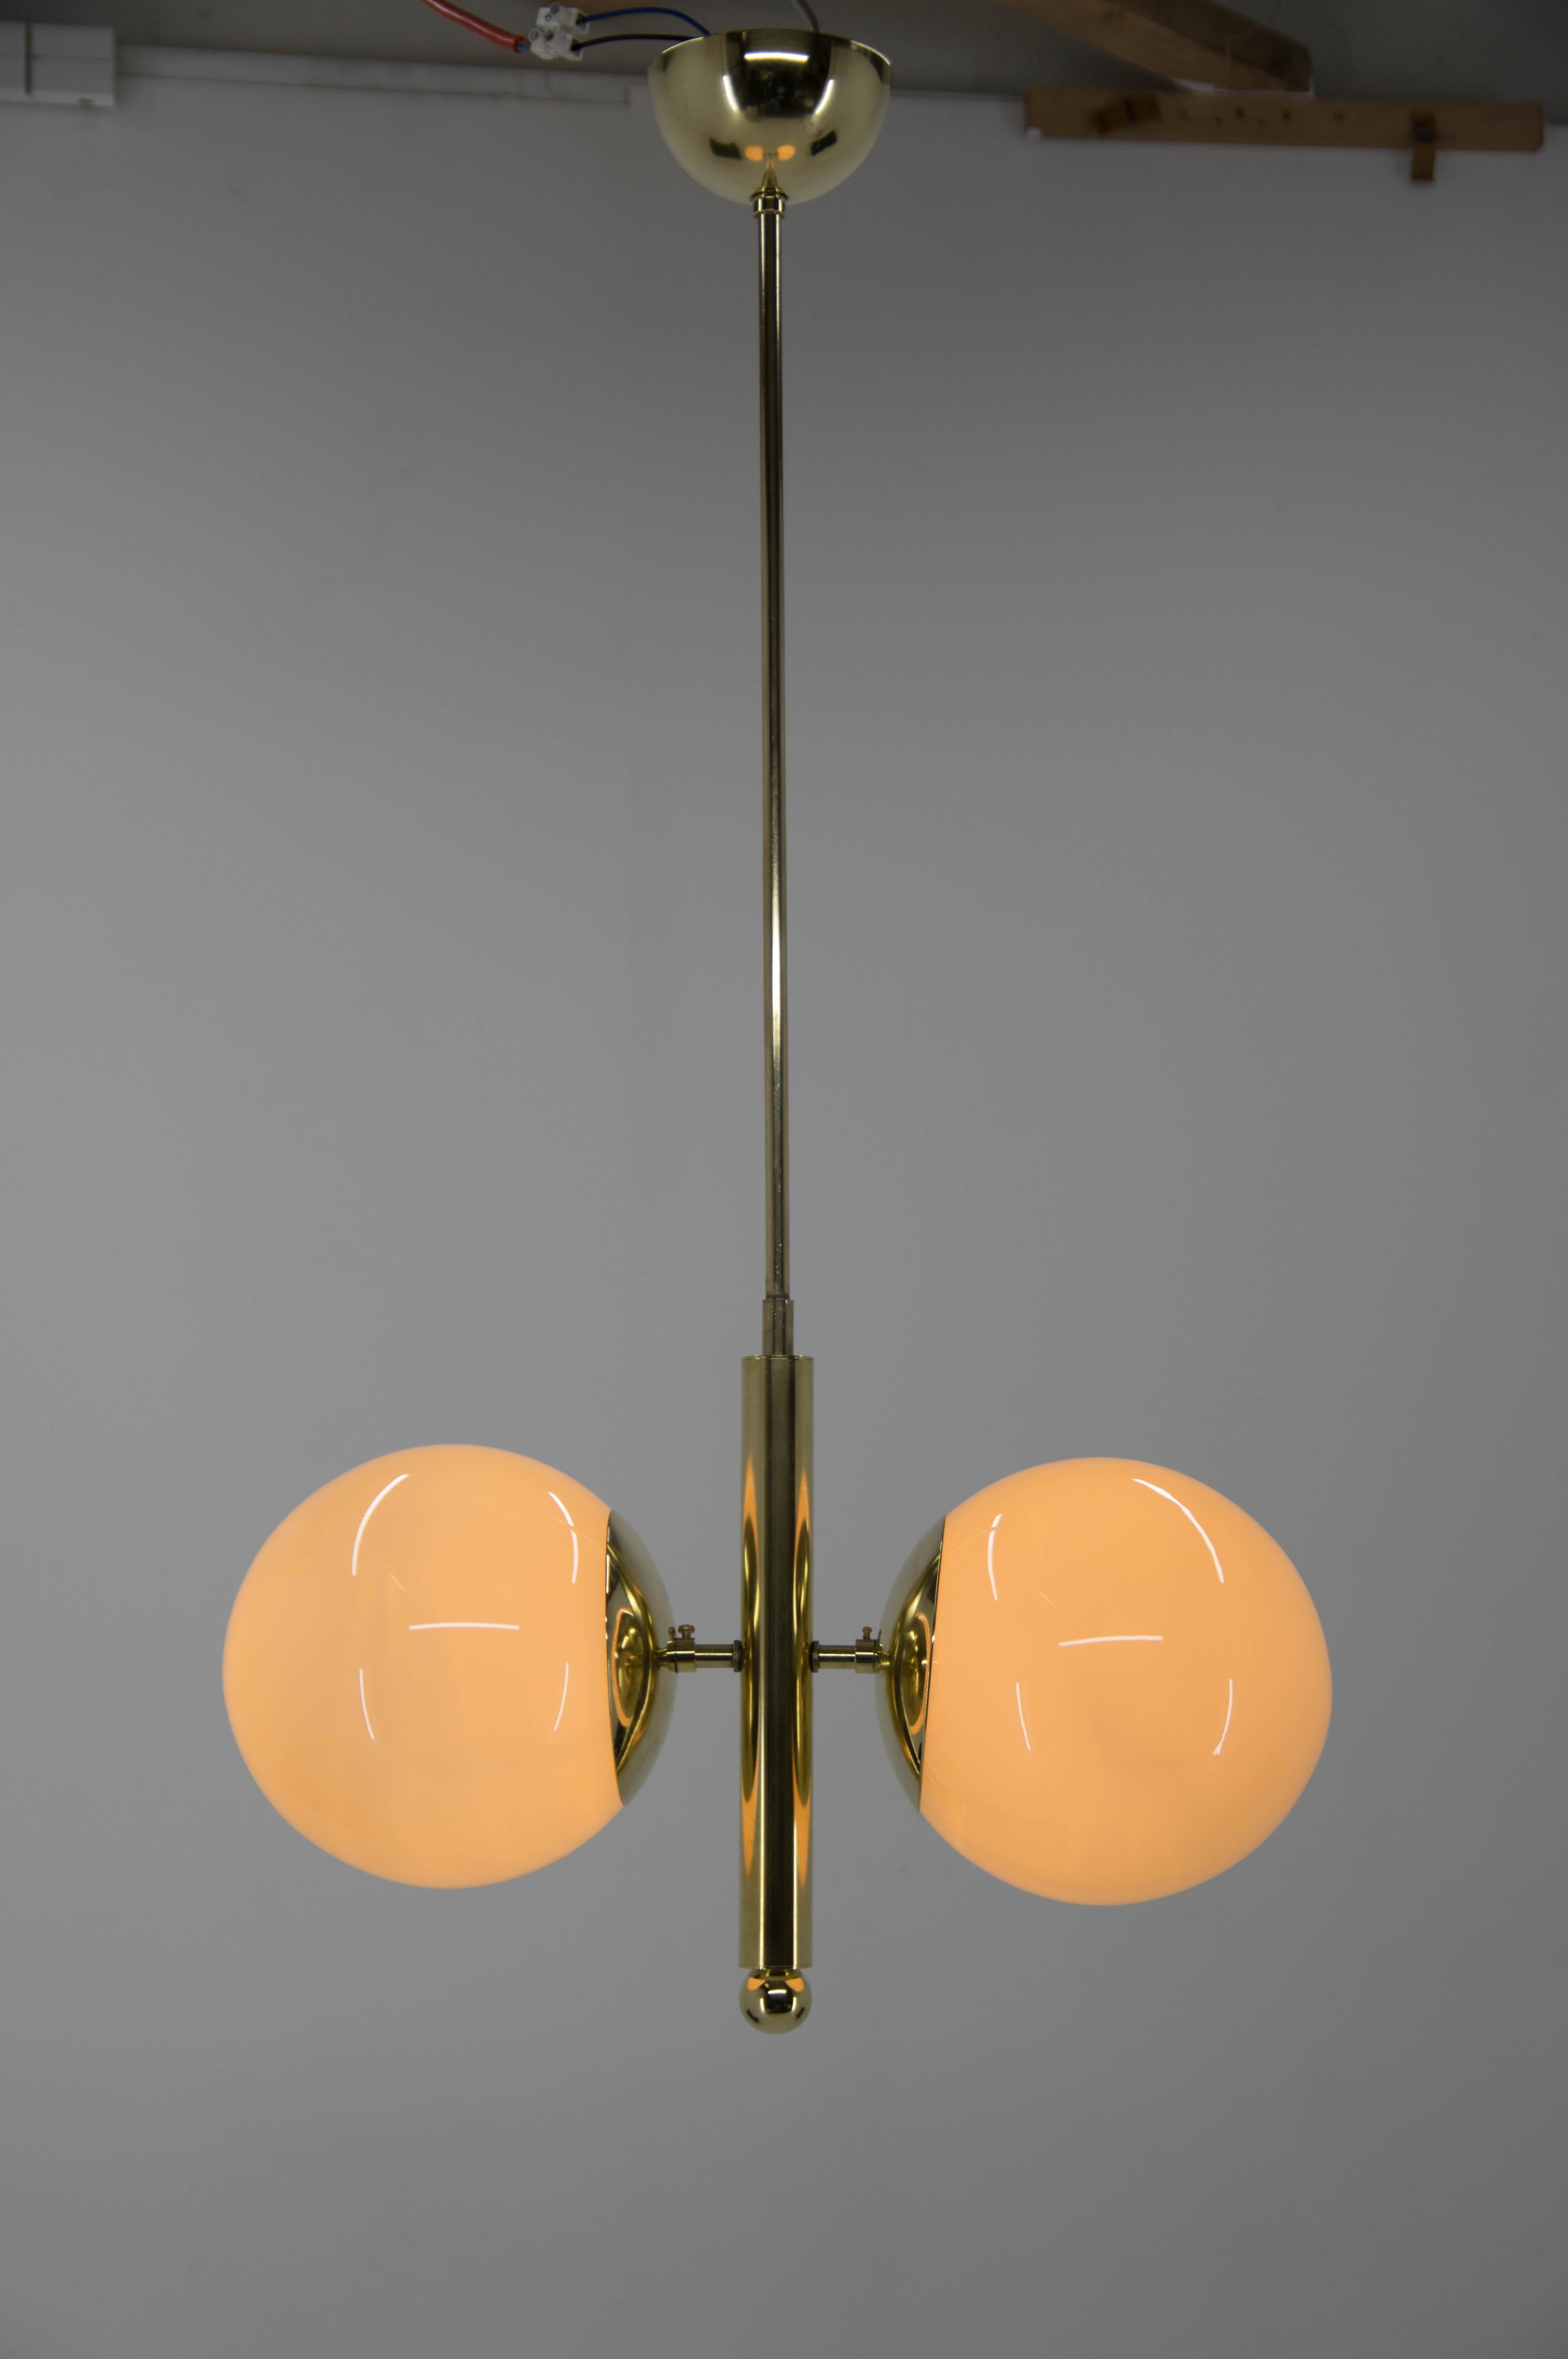 Elegant Art Deco chandelier attributed to Halabala was completely restored - excellent condition
White globes on request.
Rewired: 2x60W, E25-E27 bulbs
US wiring compatible.